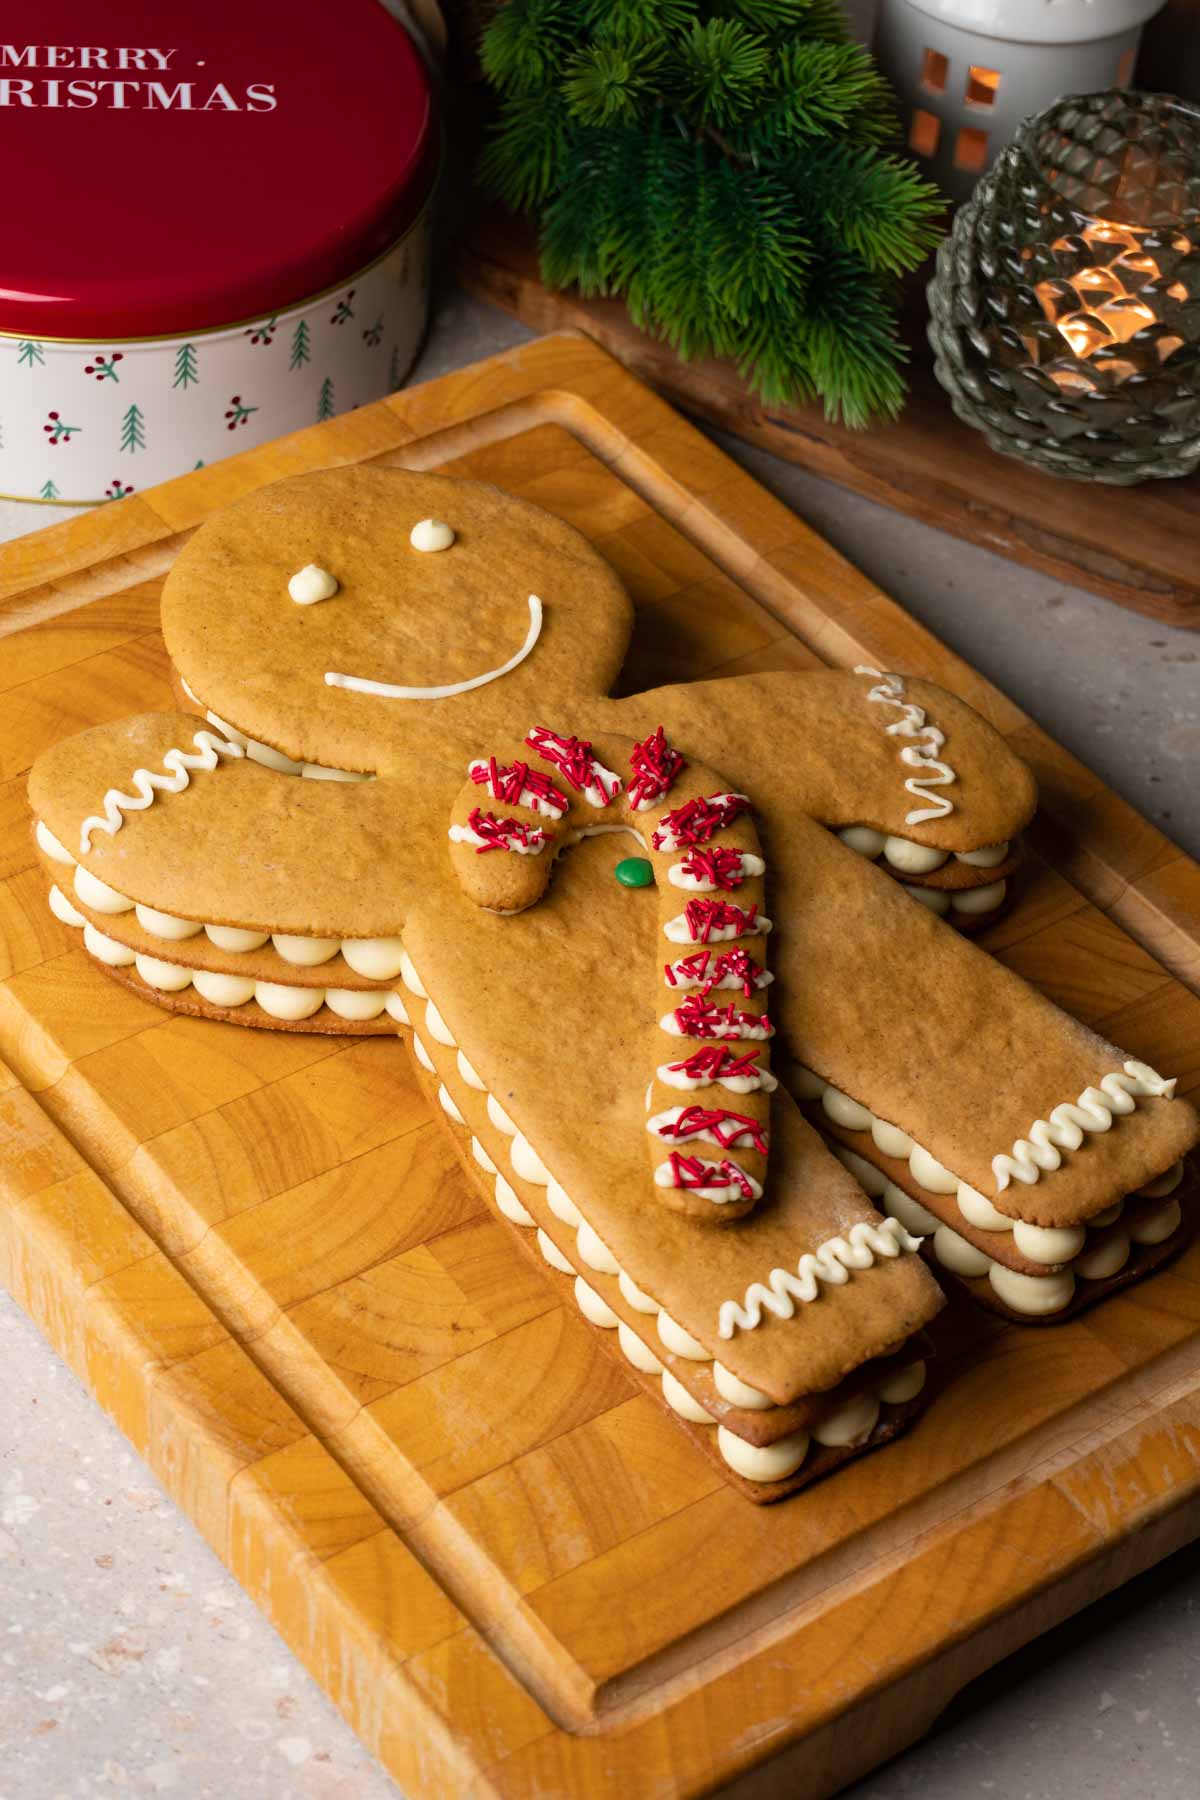 Gingerbread man cake on a wooden serving board.